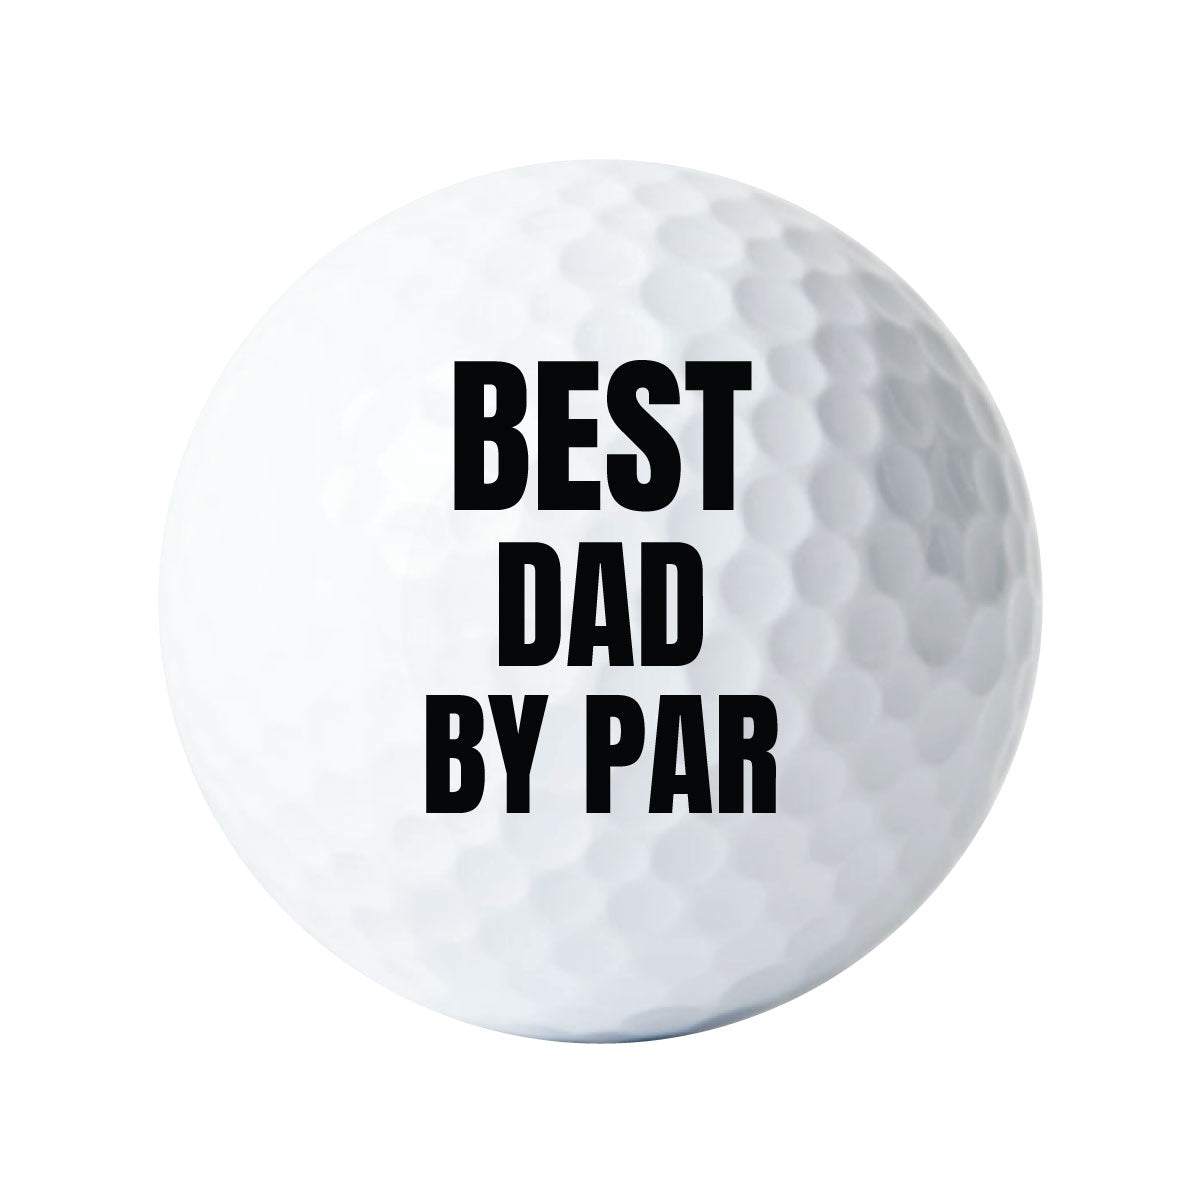 Best by Par Golf Balls with Custom Name, 3-Pack Printed White Golf Balls